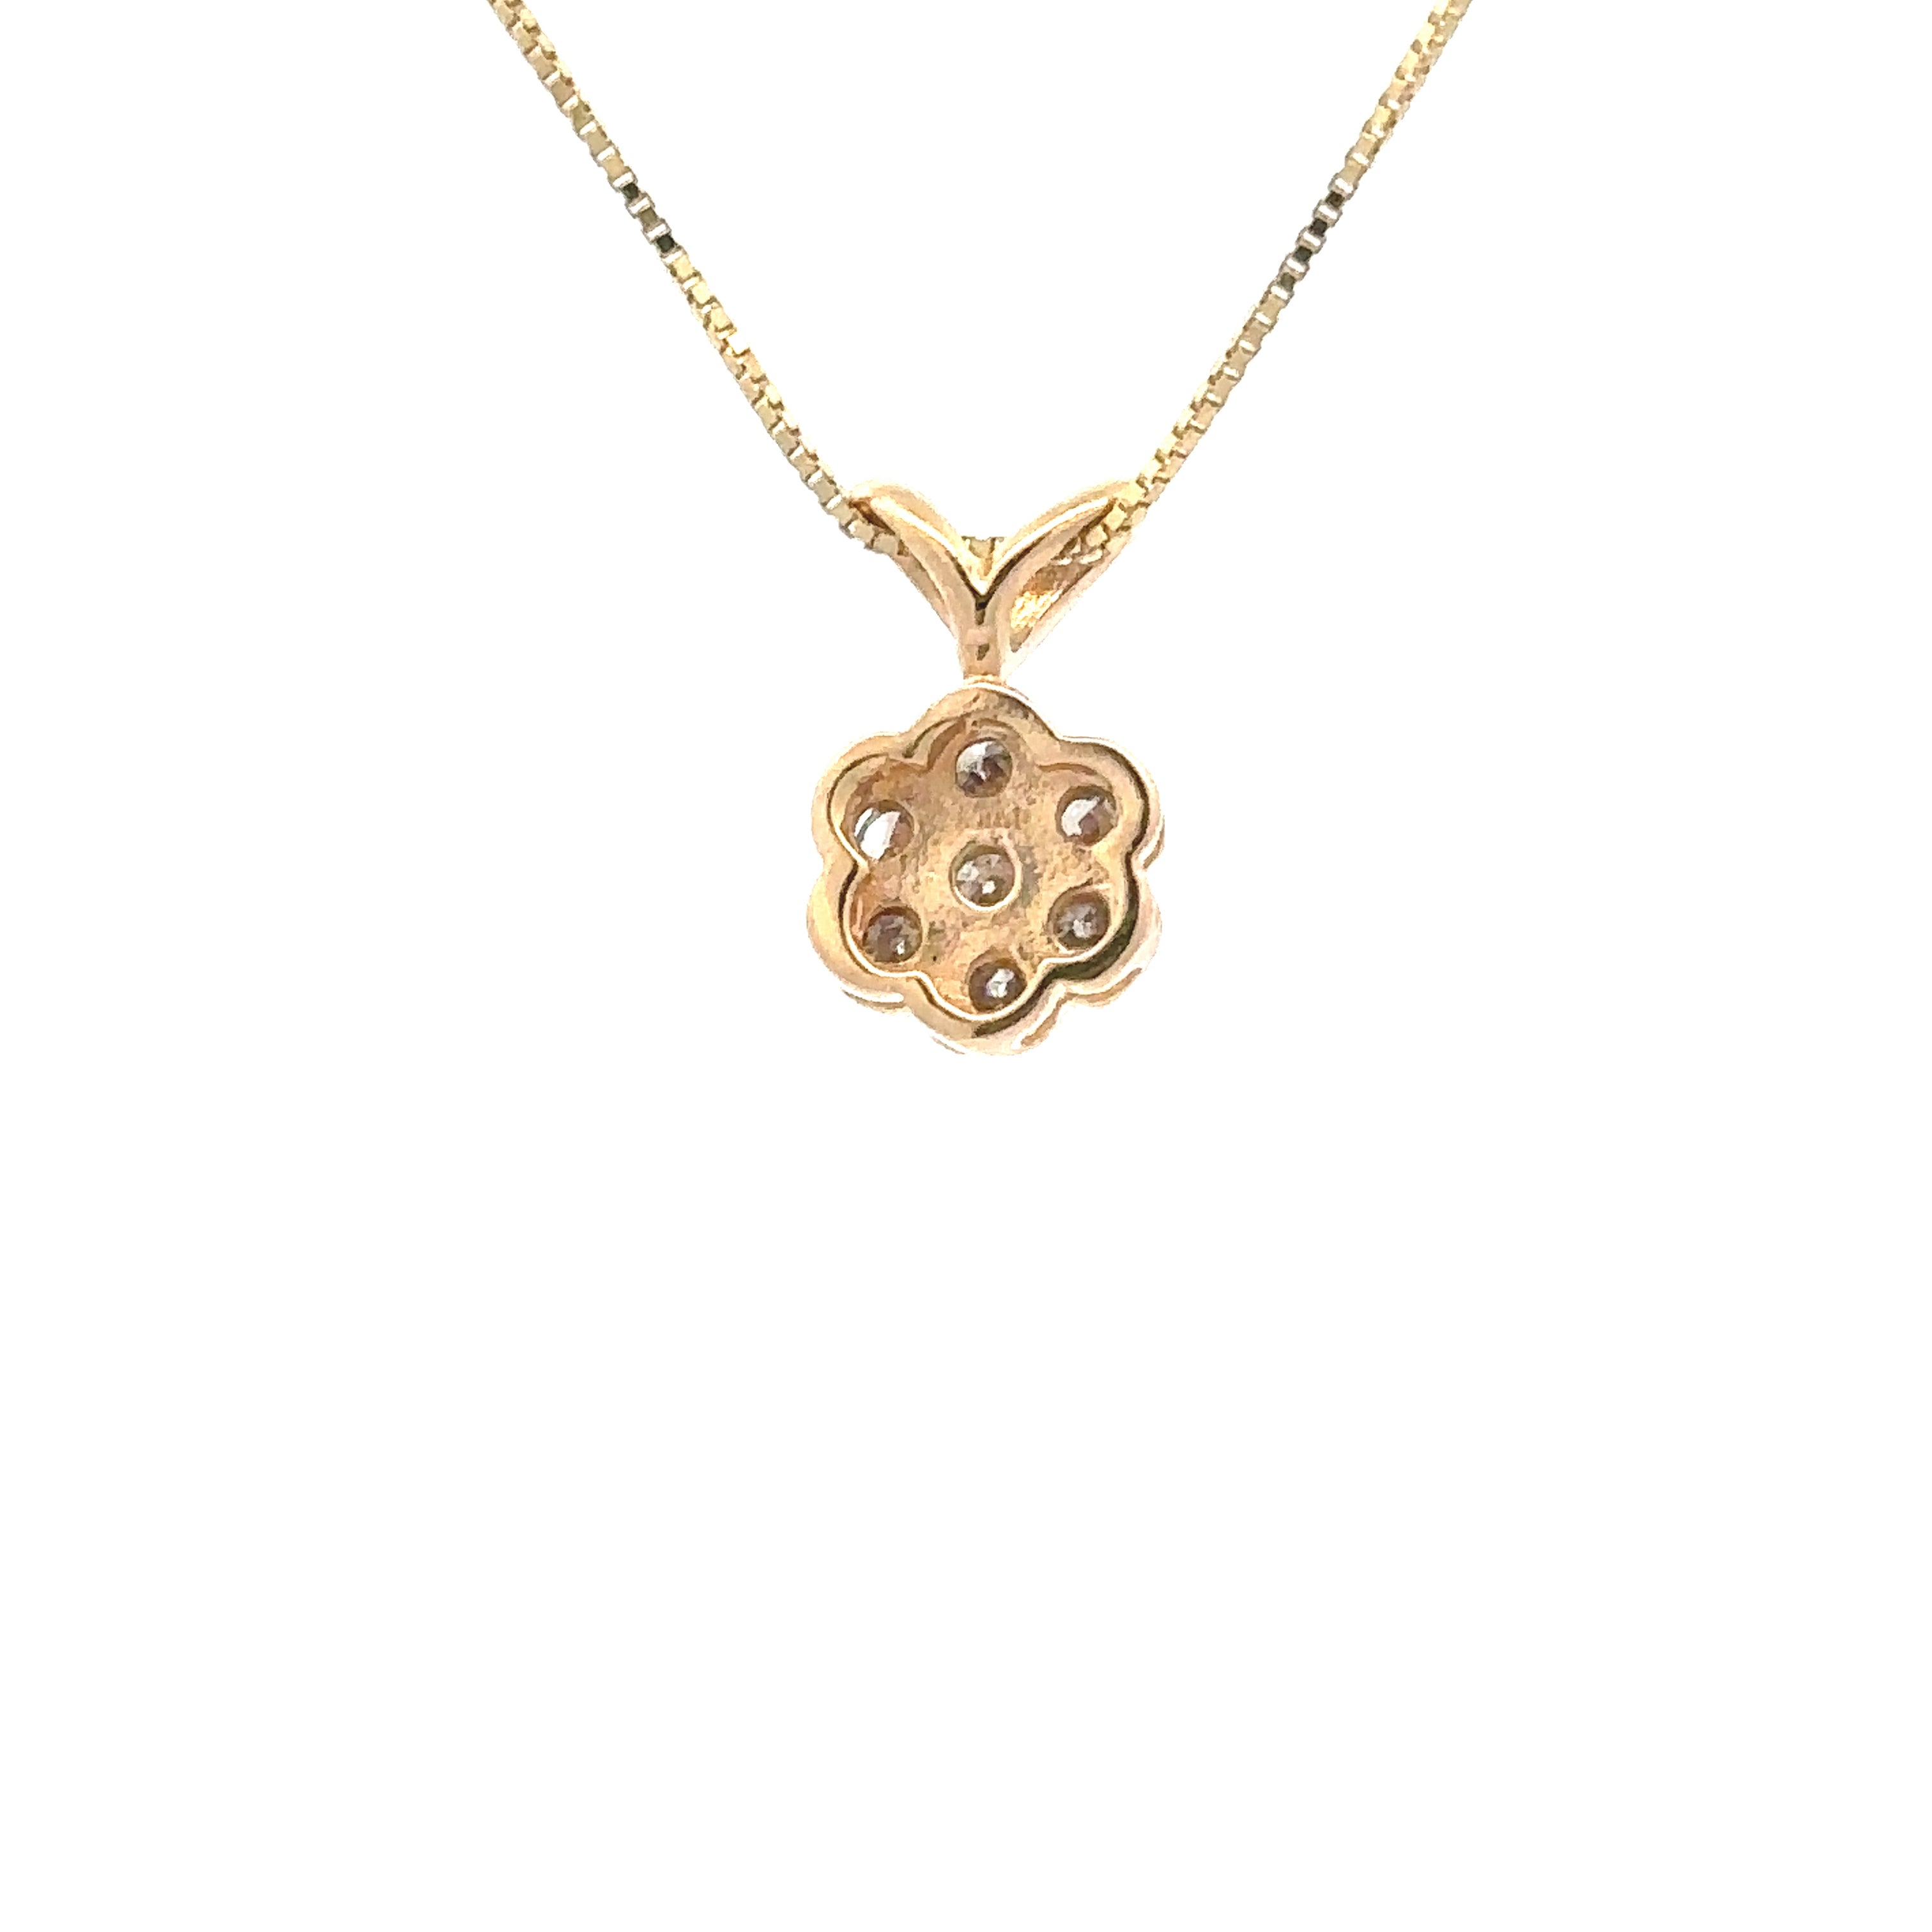 Estate Collection: 14K Yellow Gold 1/6CT. Diamond Flower Cluster Pendant Necklace